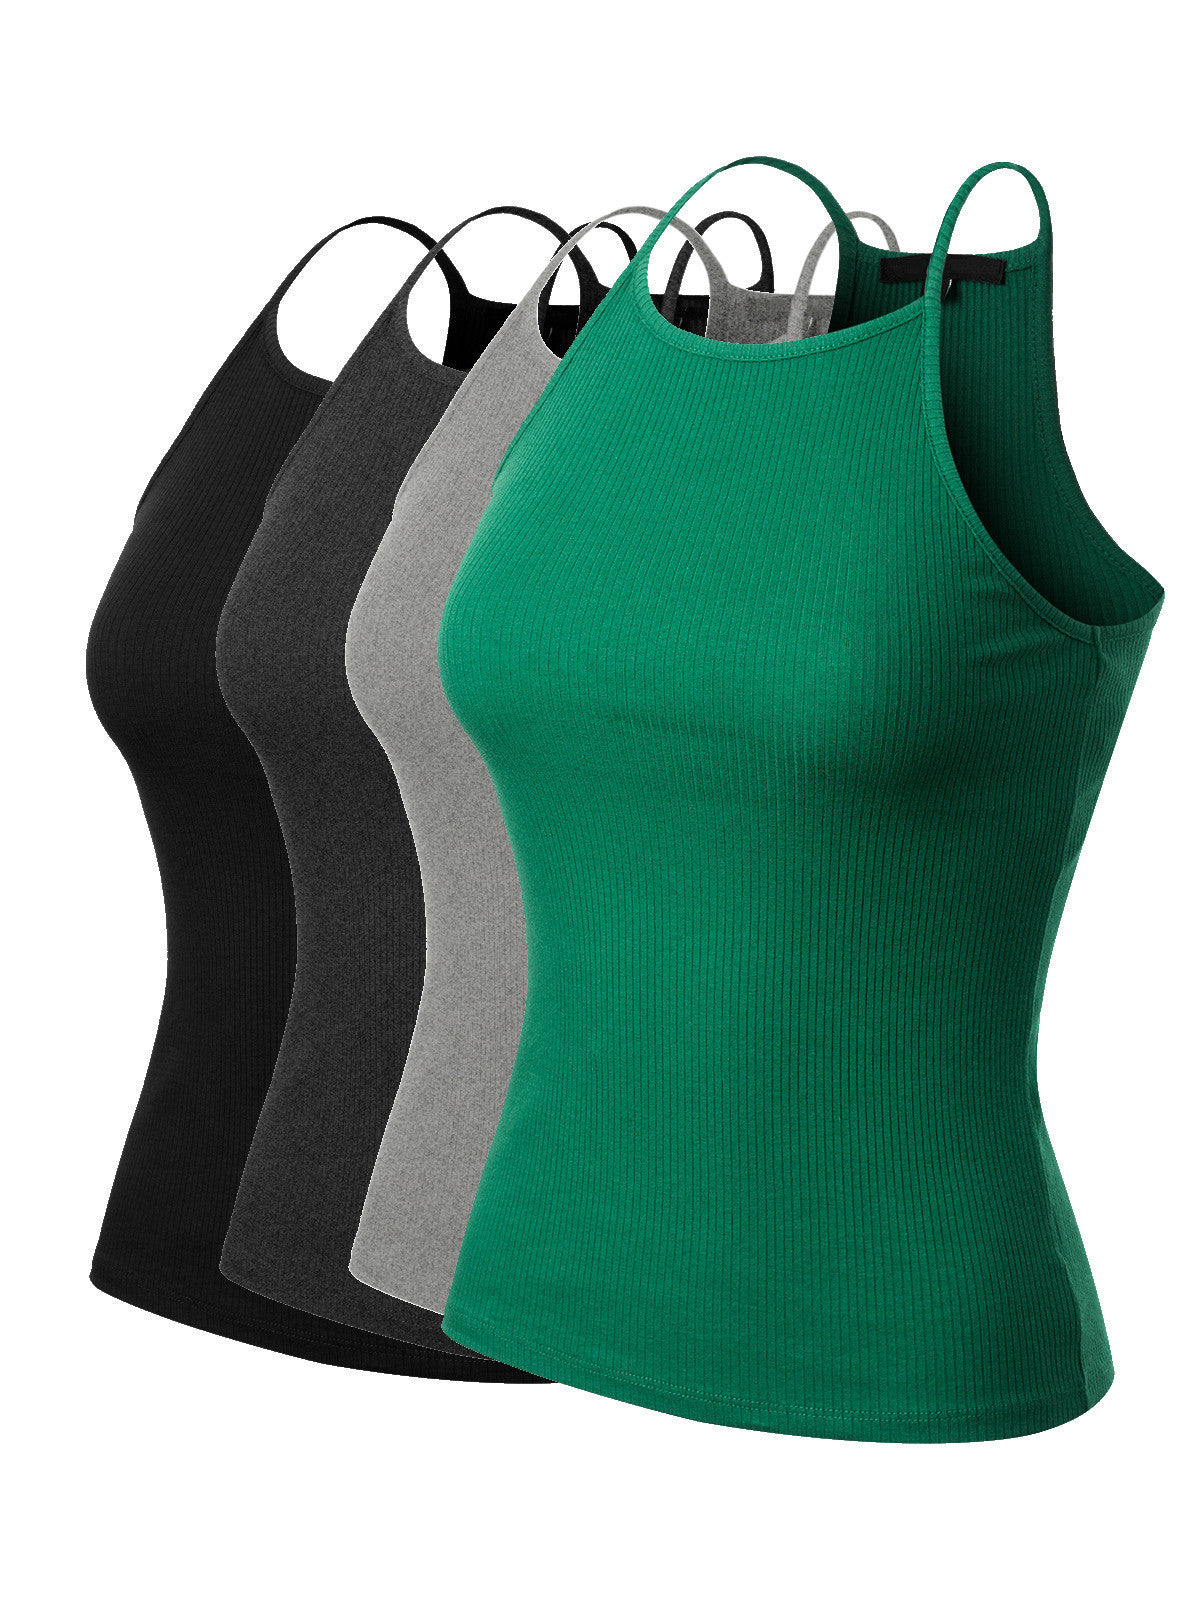 4PACK - Black/Charcoal/H.Grey/Kelly Green